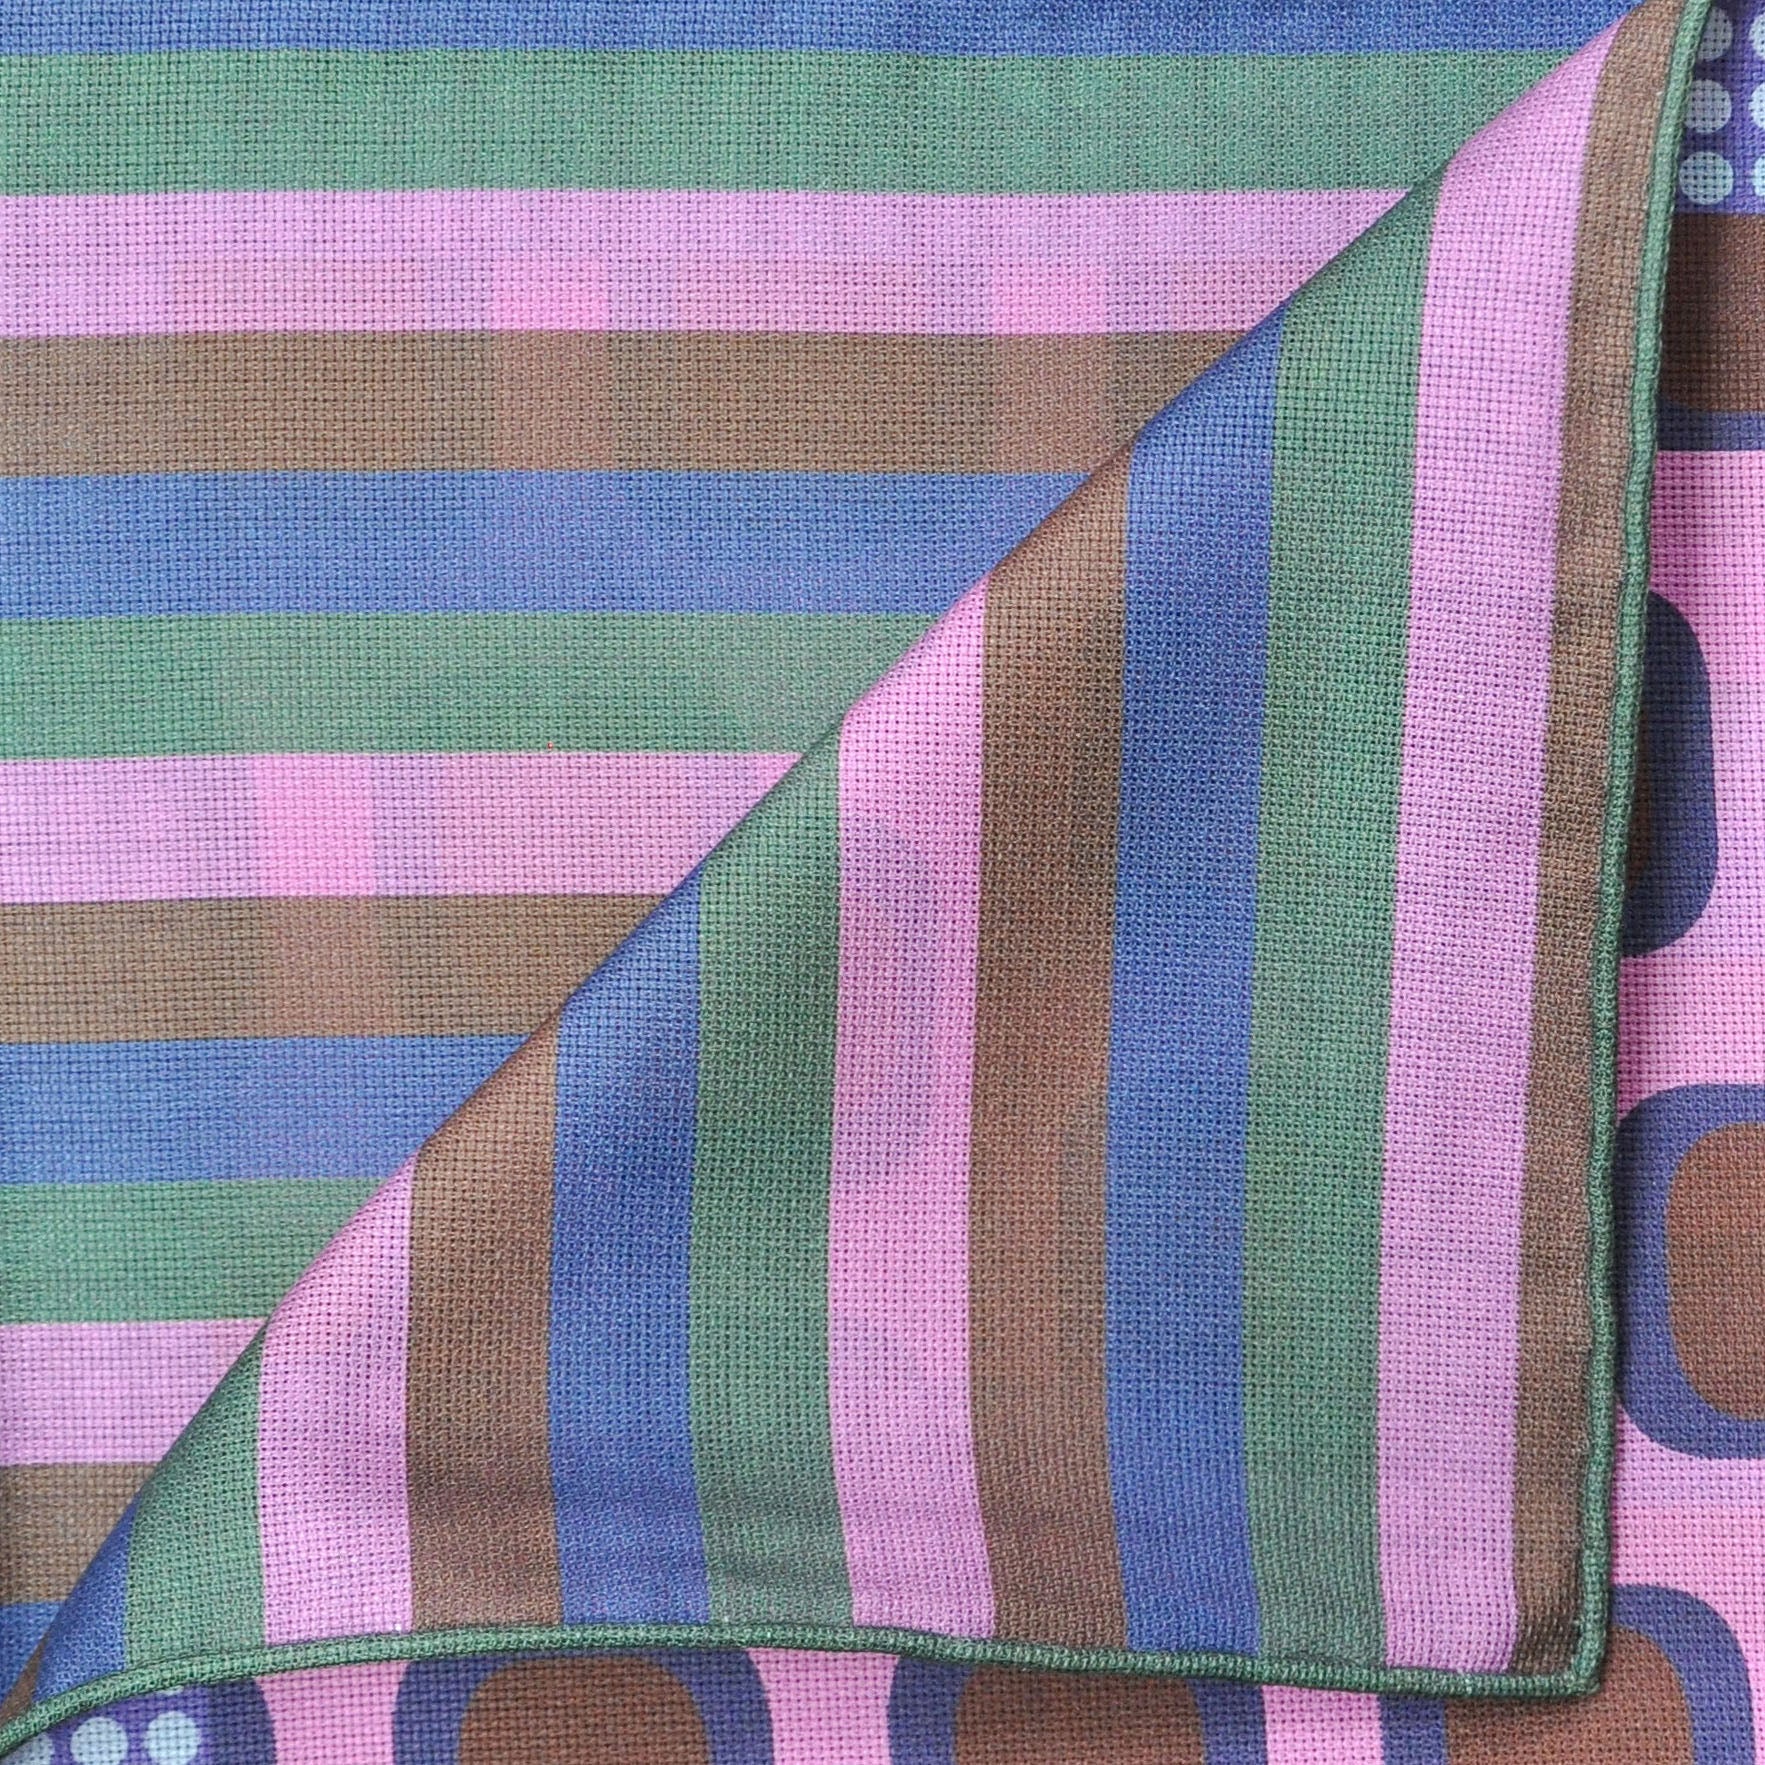 Dots, Geo's & Stripes Reversible Panama Silk Pocket Square in Pink, Blue & Brown